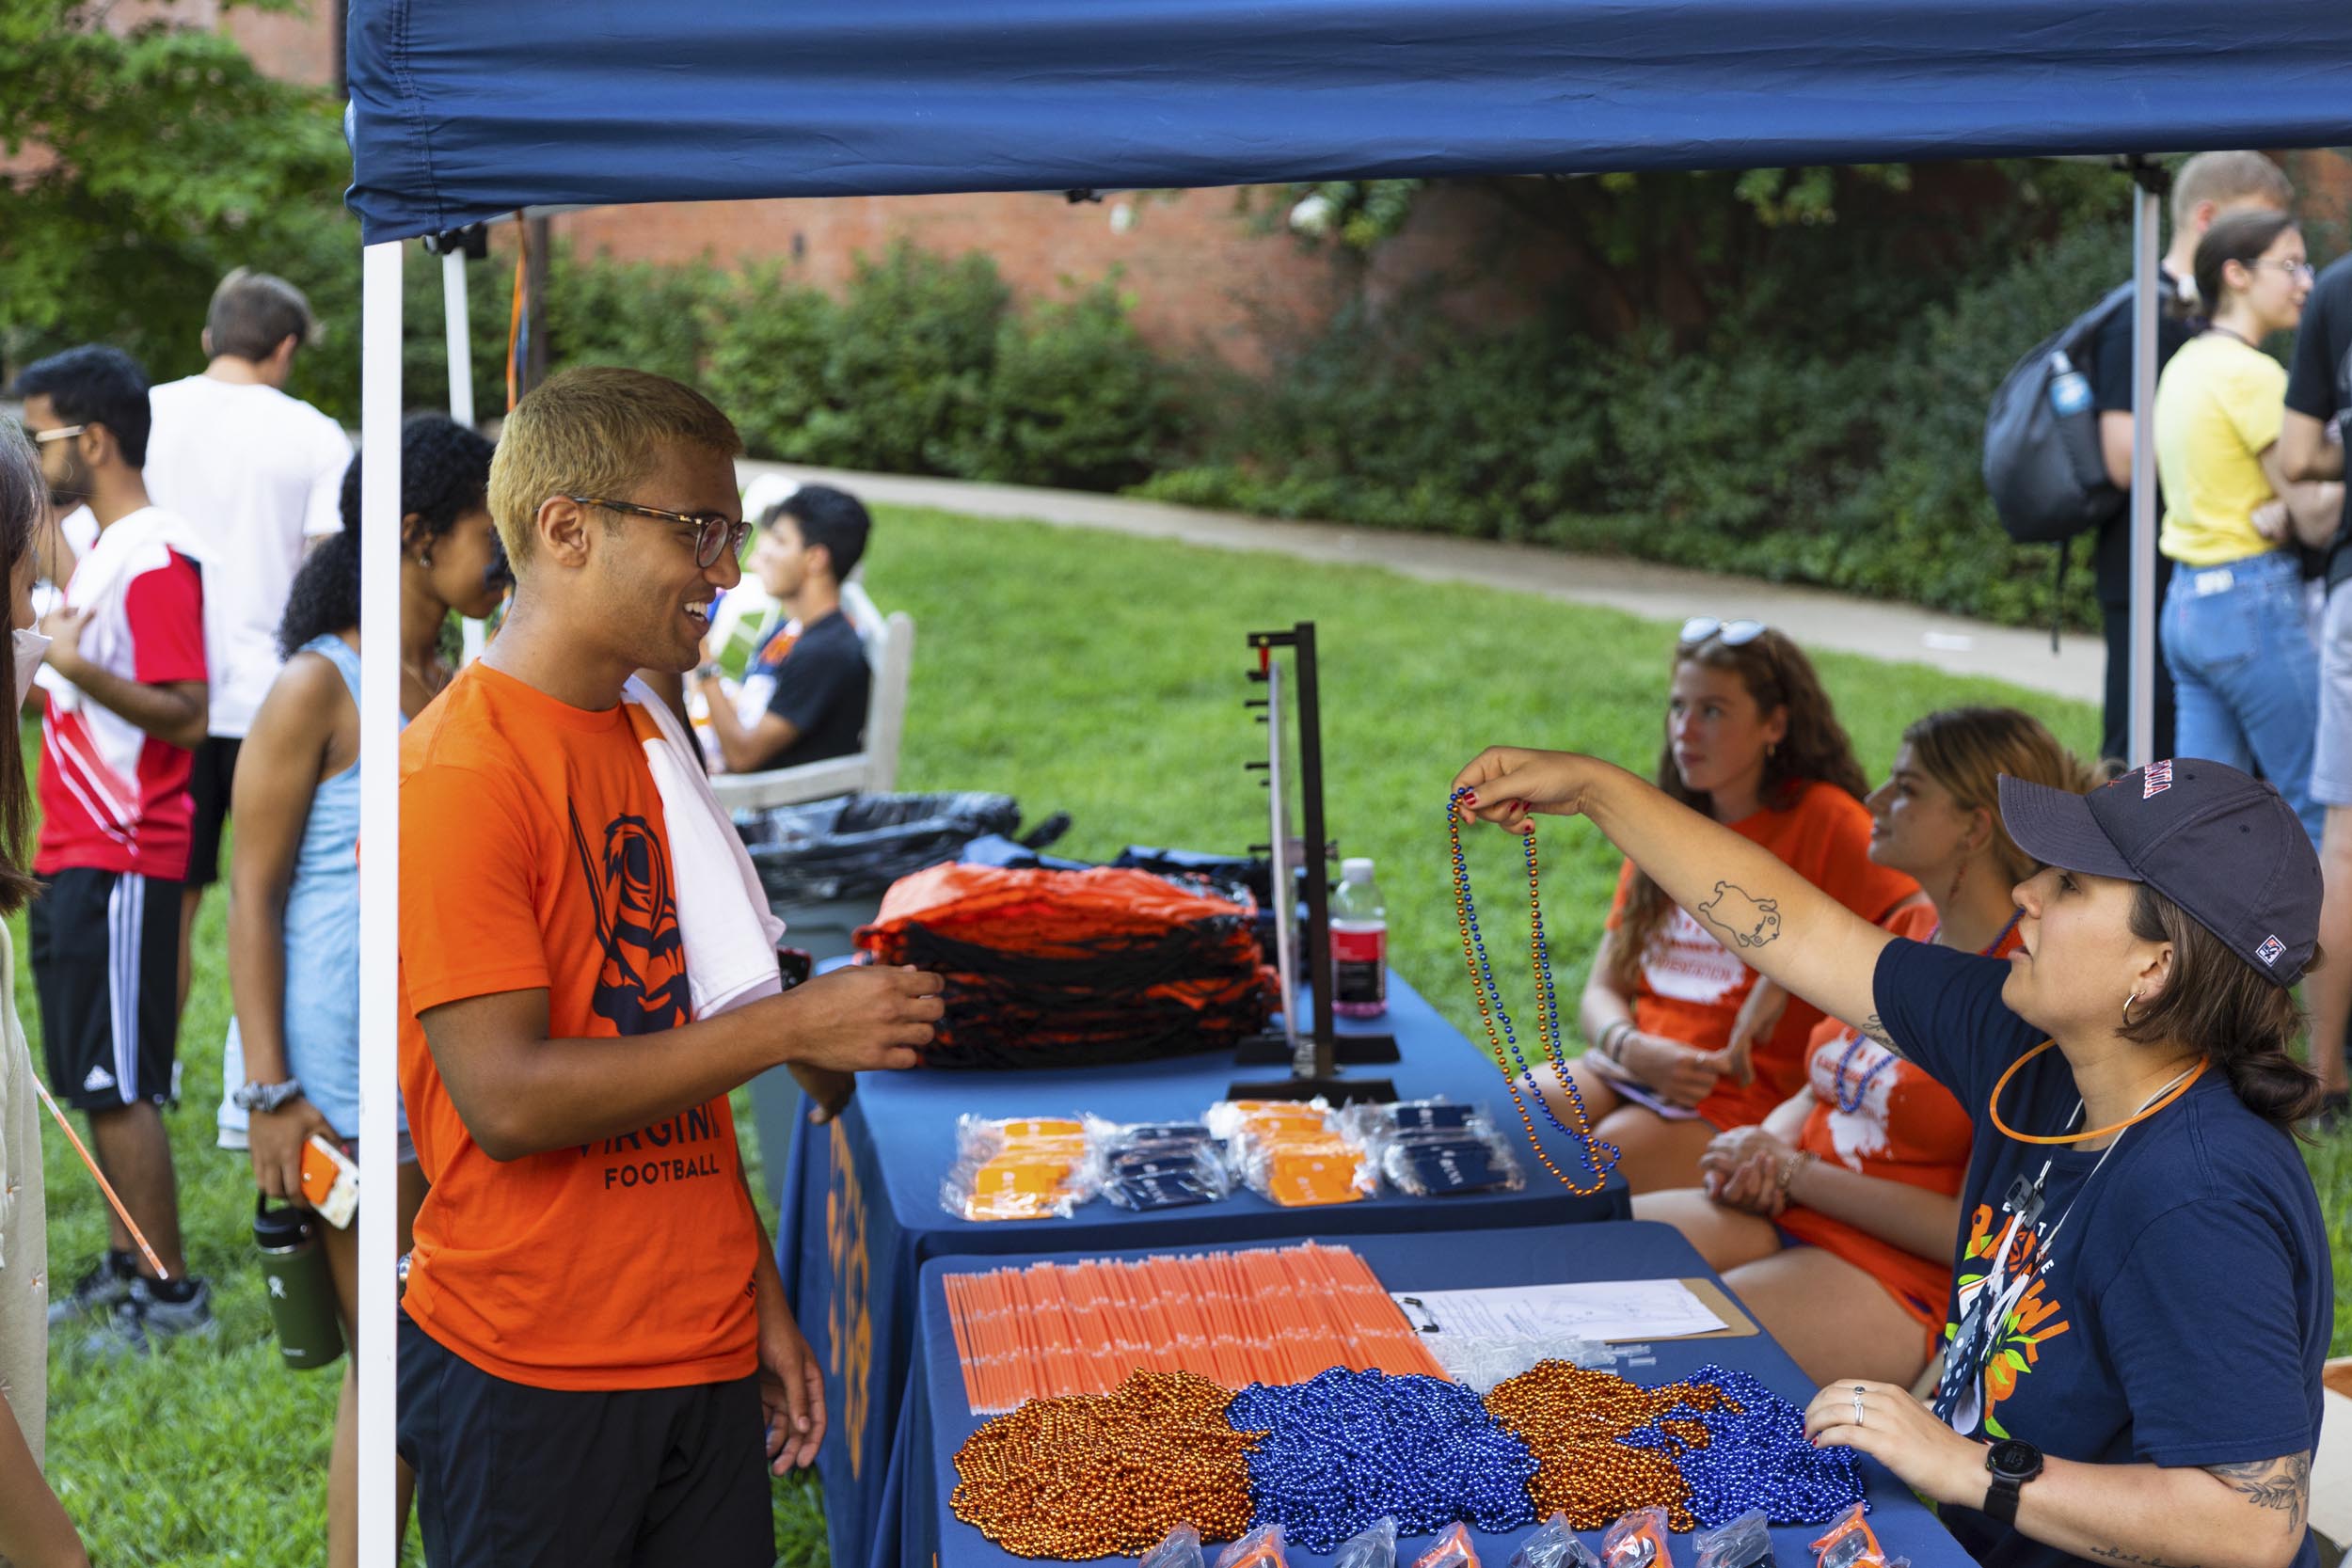 Student standing at a table of free UVA swag being handed blue and orange beads